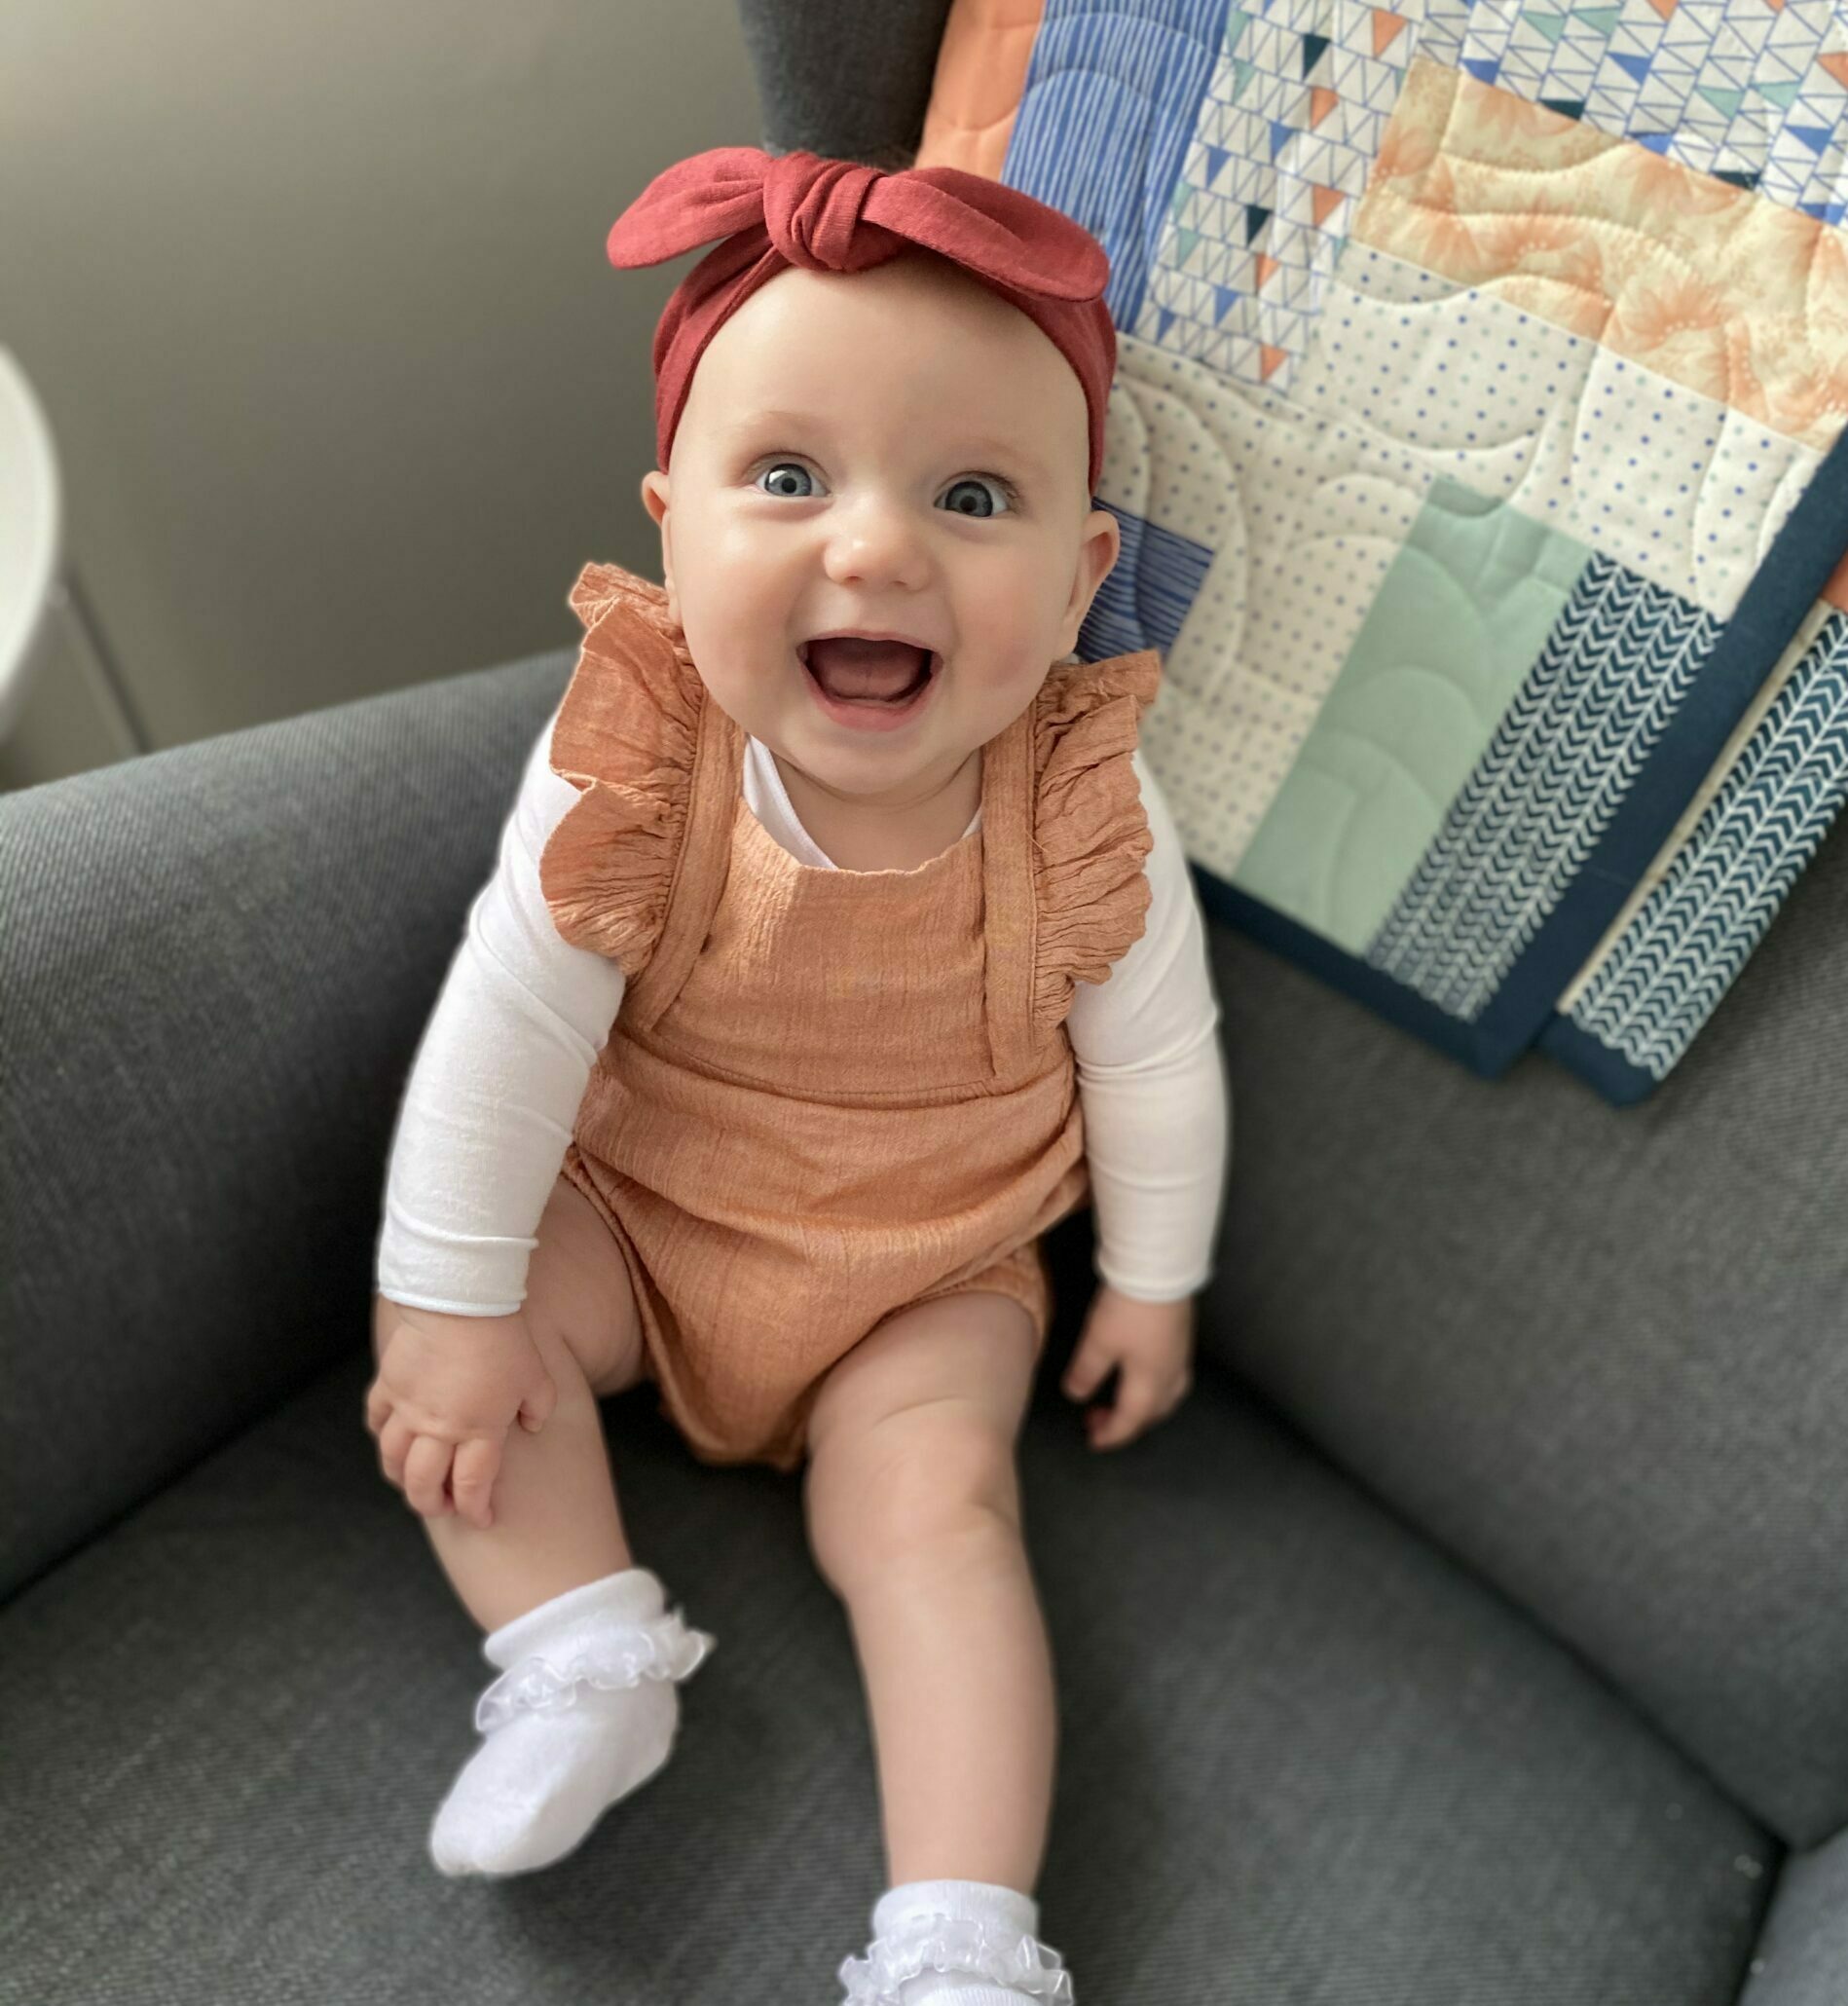 happy baby girl smiling on couch